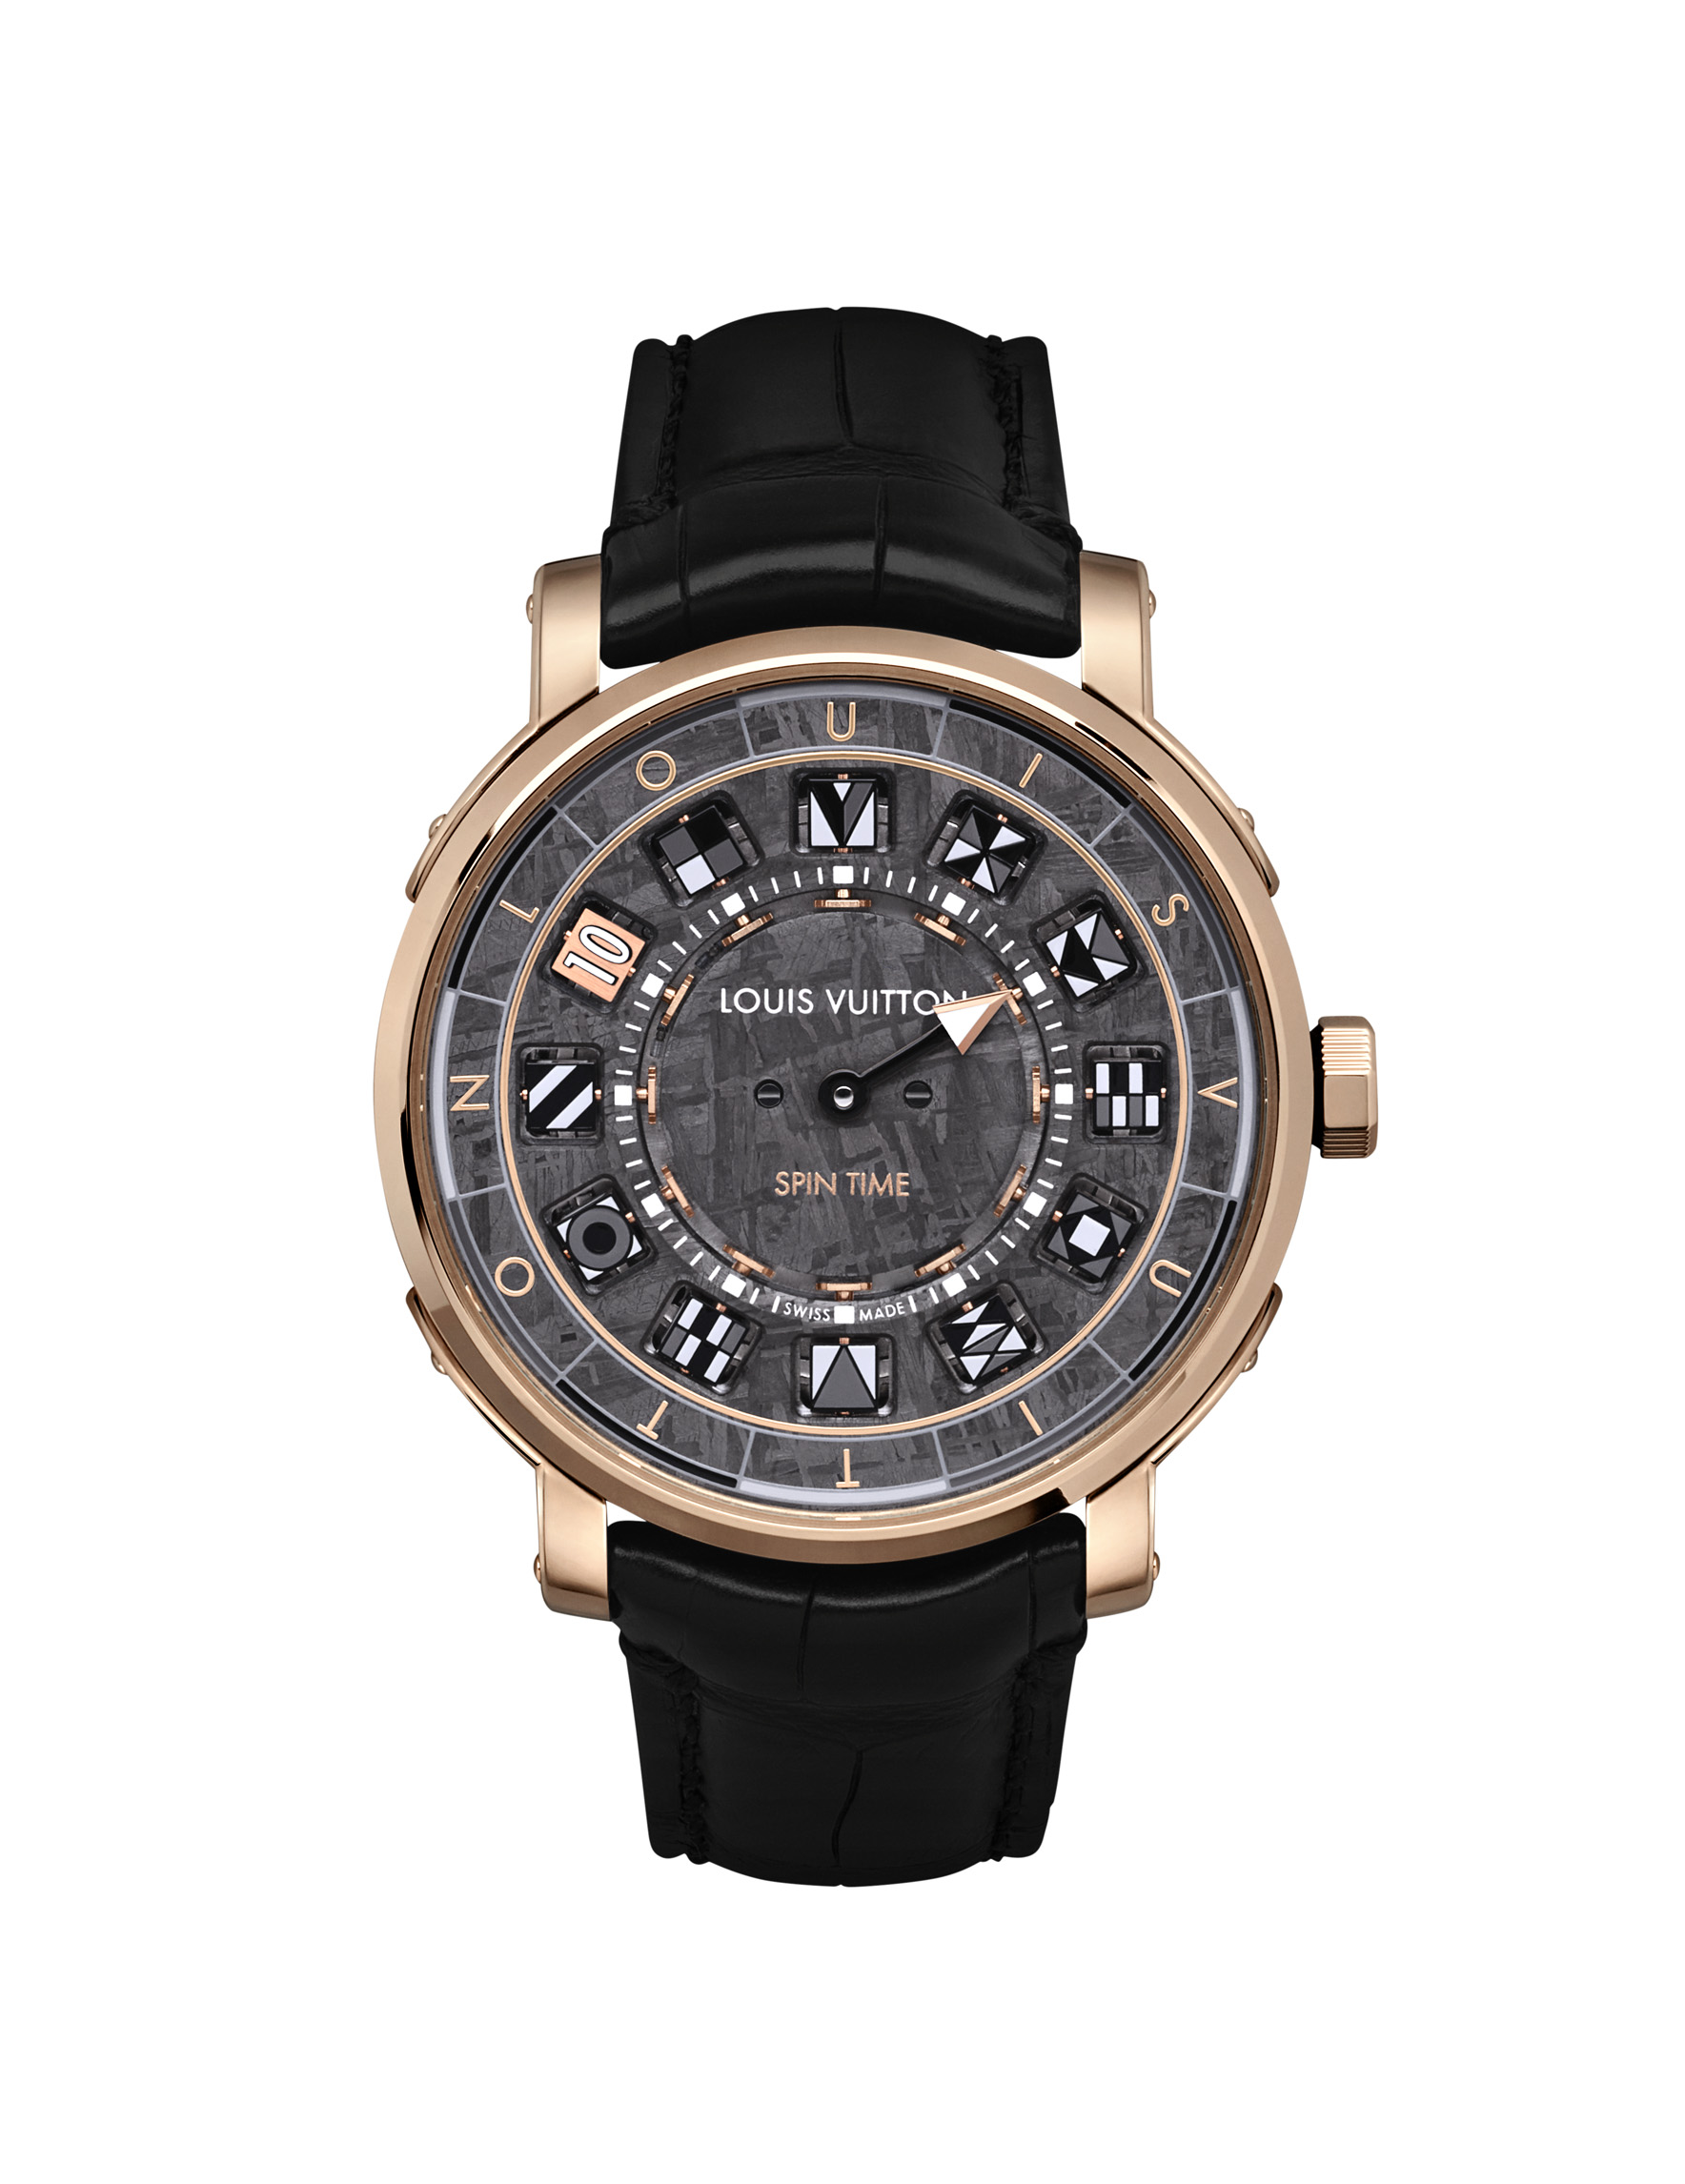 Escale Spin Time watch in rose gold, Louis Vuitton